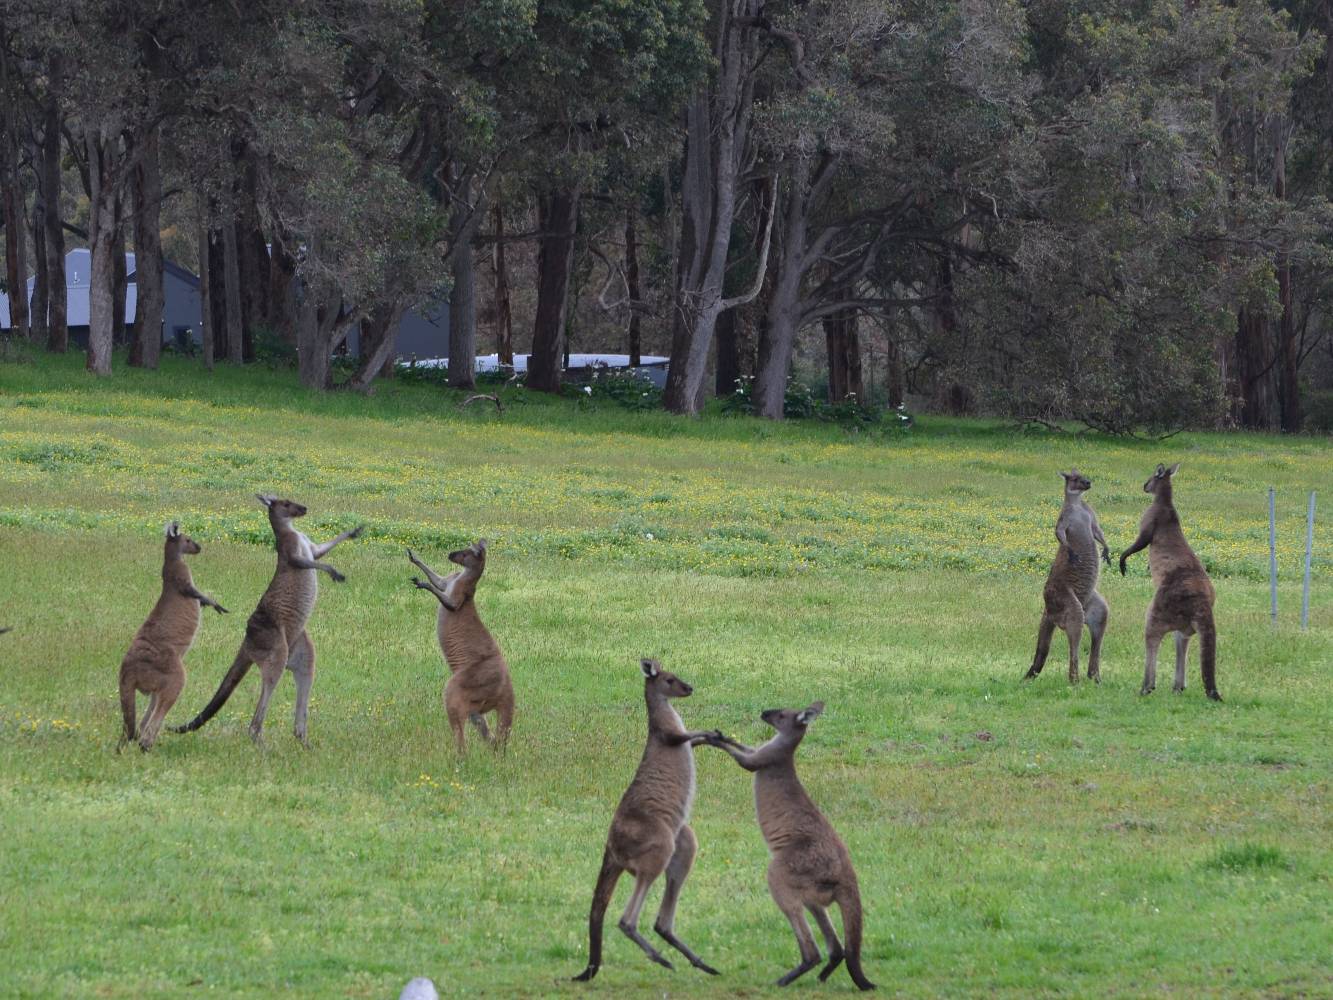 Lots of kangaroo action to be seen from the deck